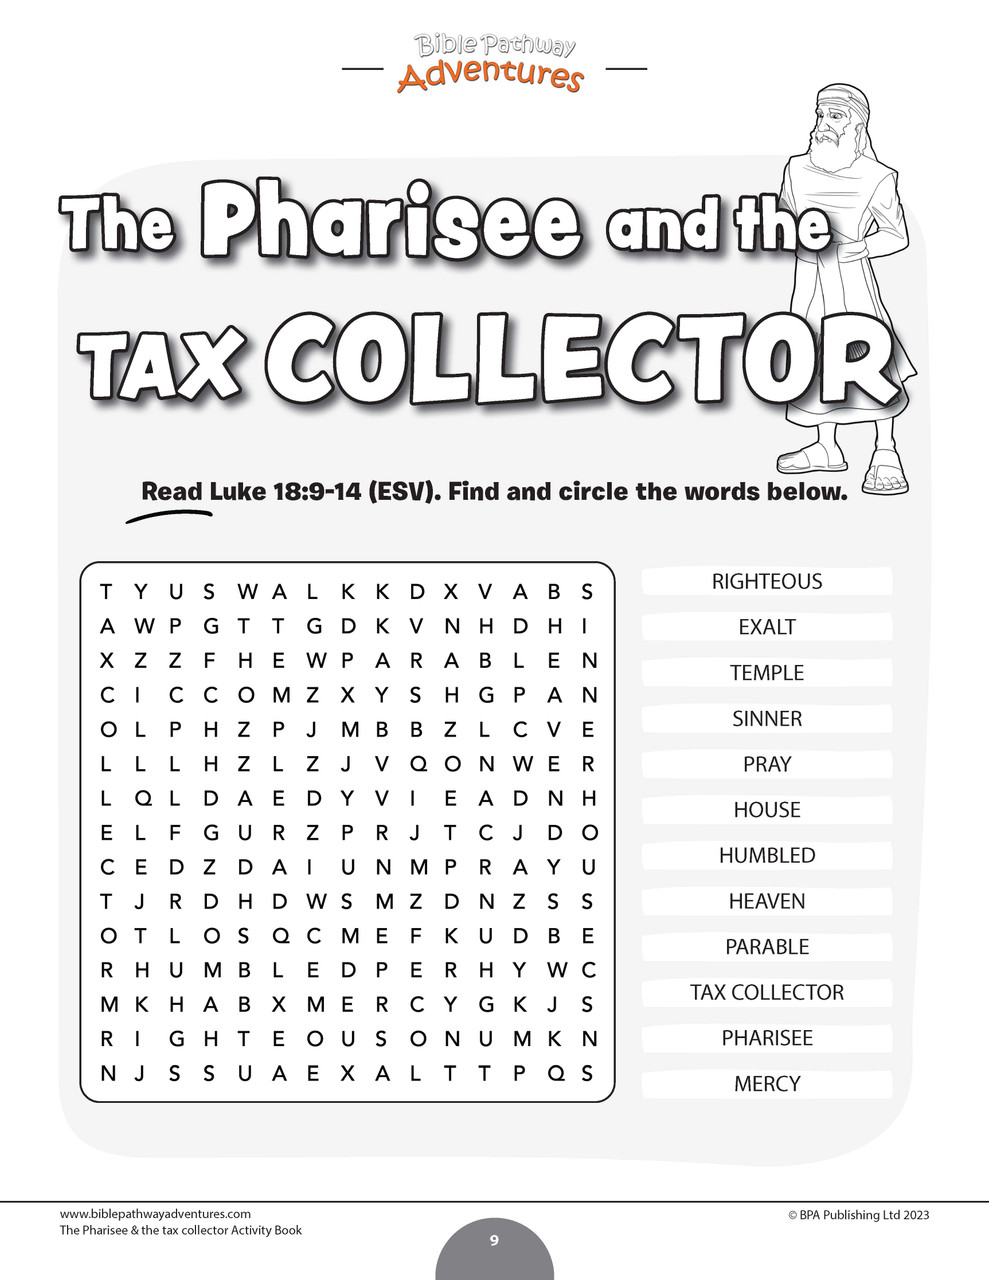 Bible parable the pharisee and the tax collector